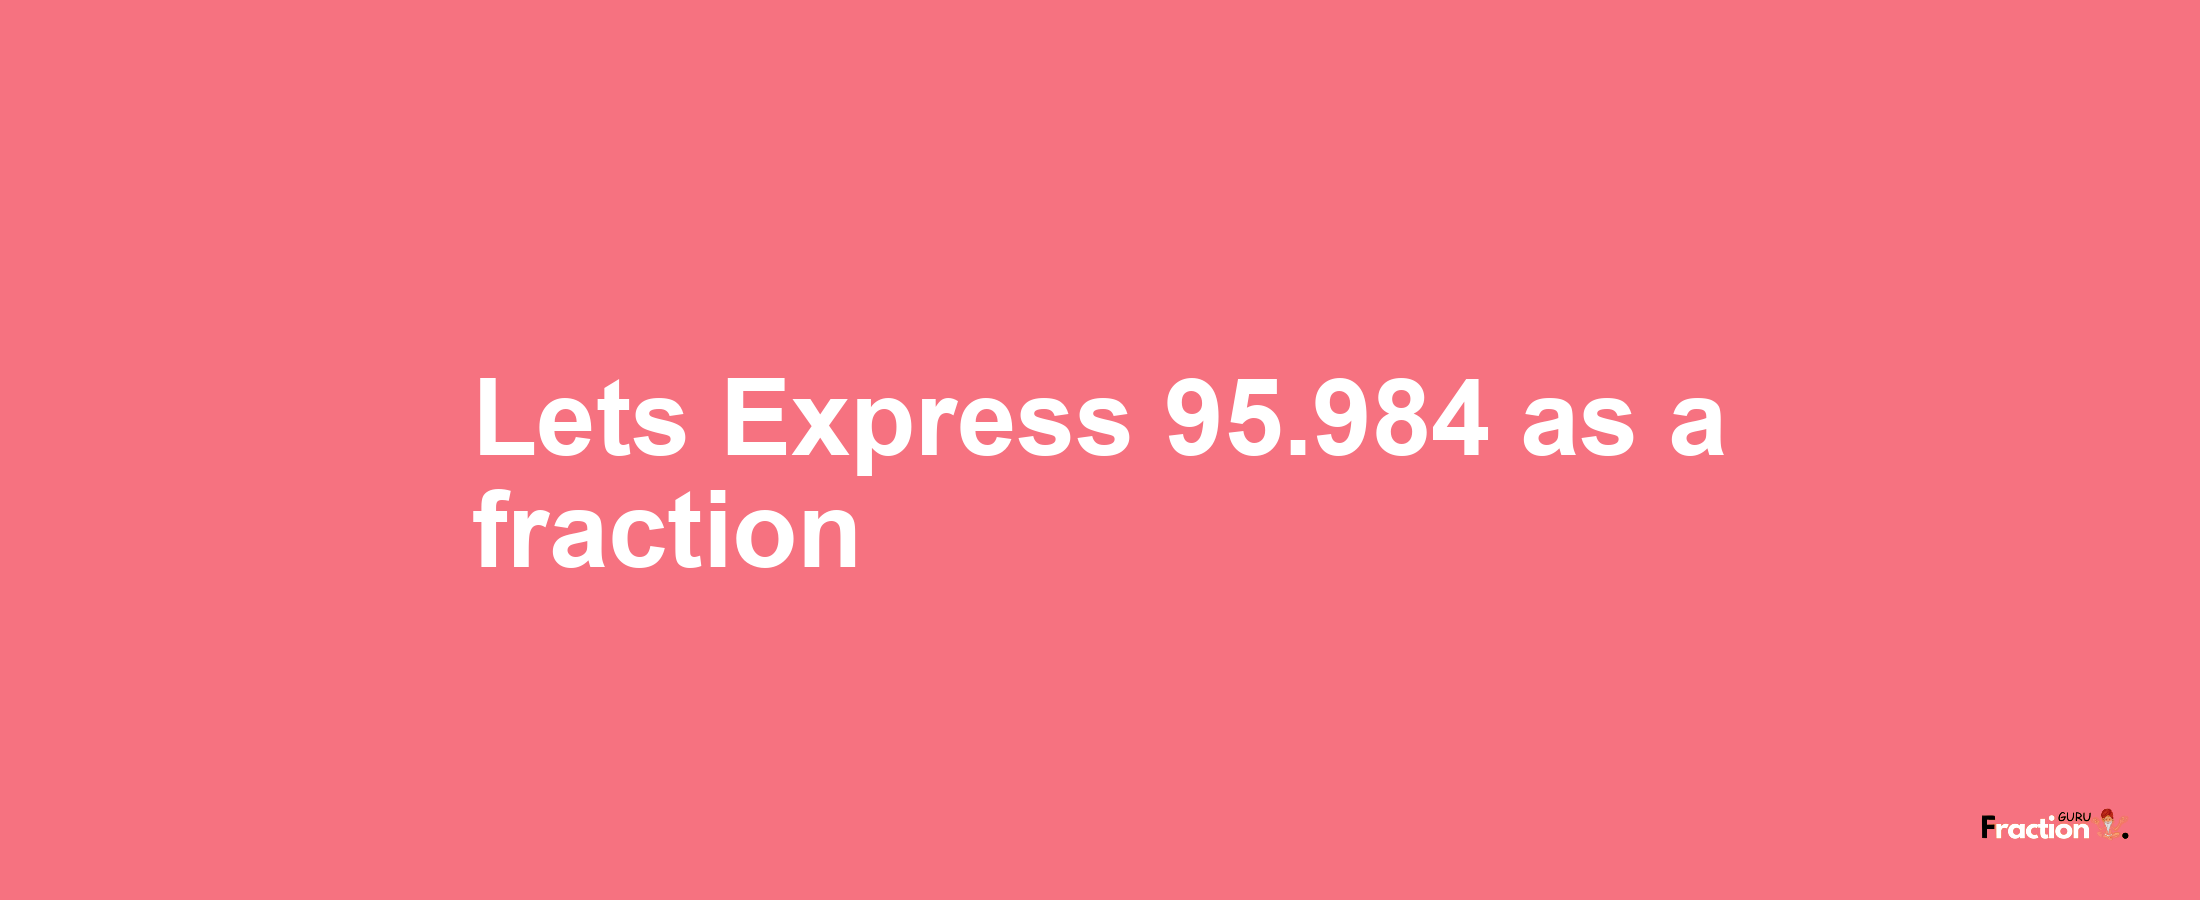 Lets Express 95.984 as afraction